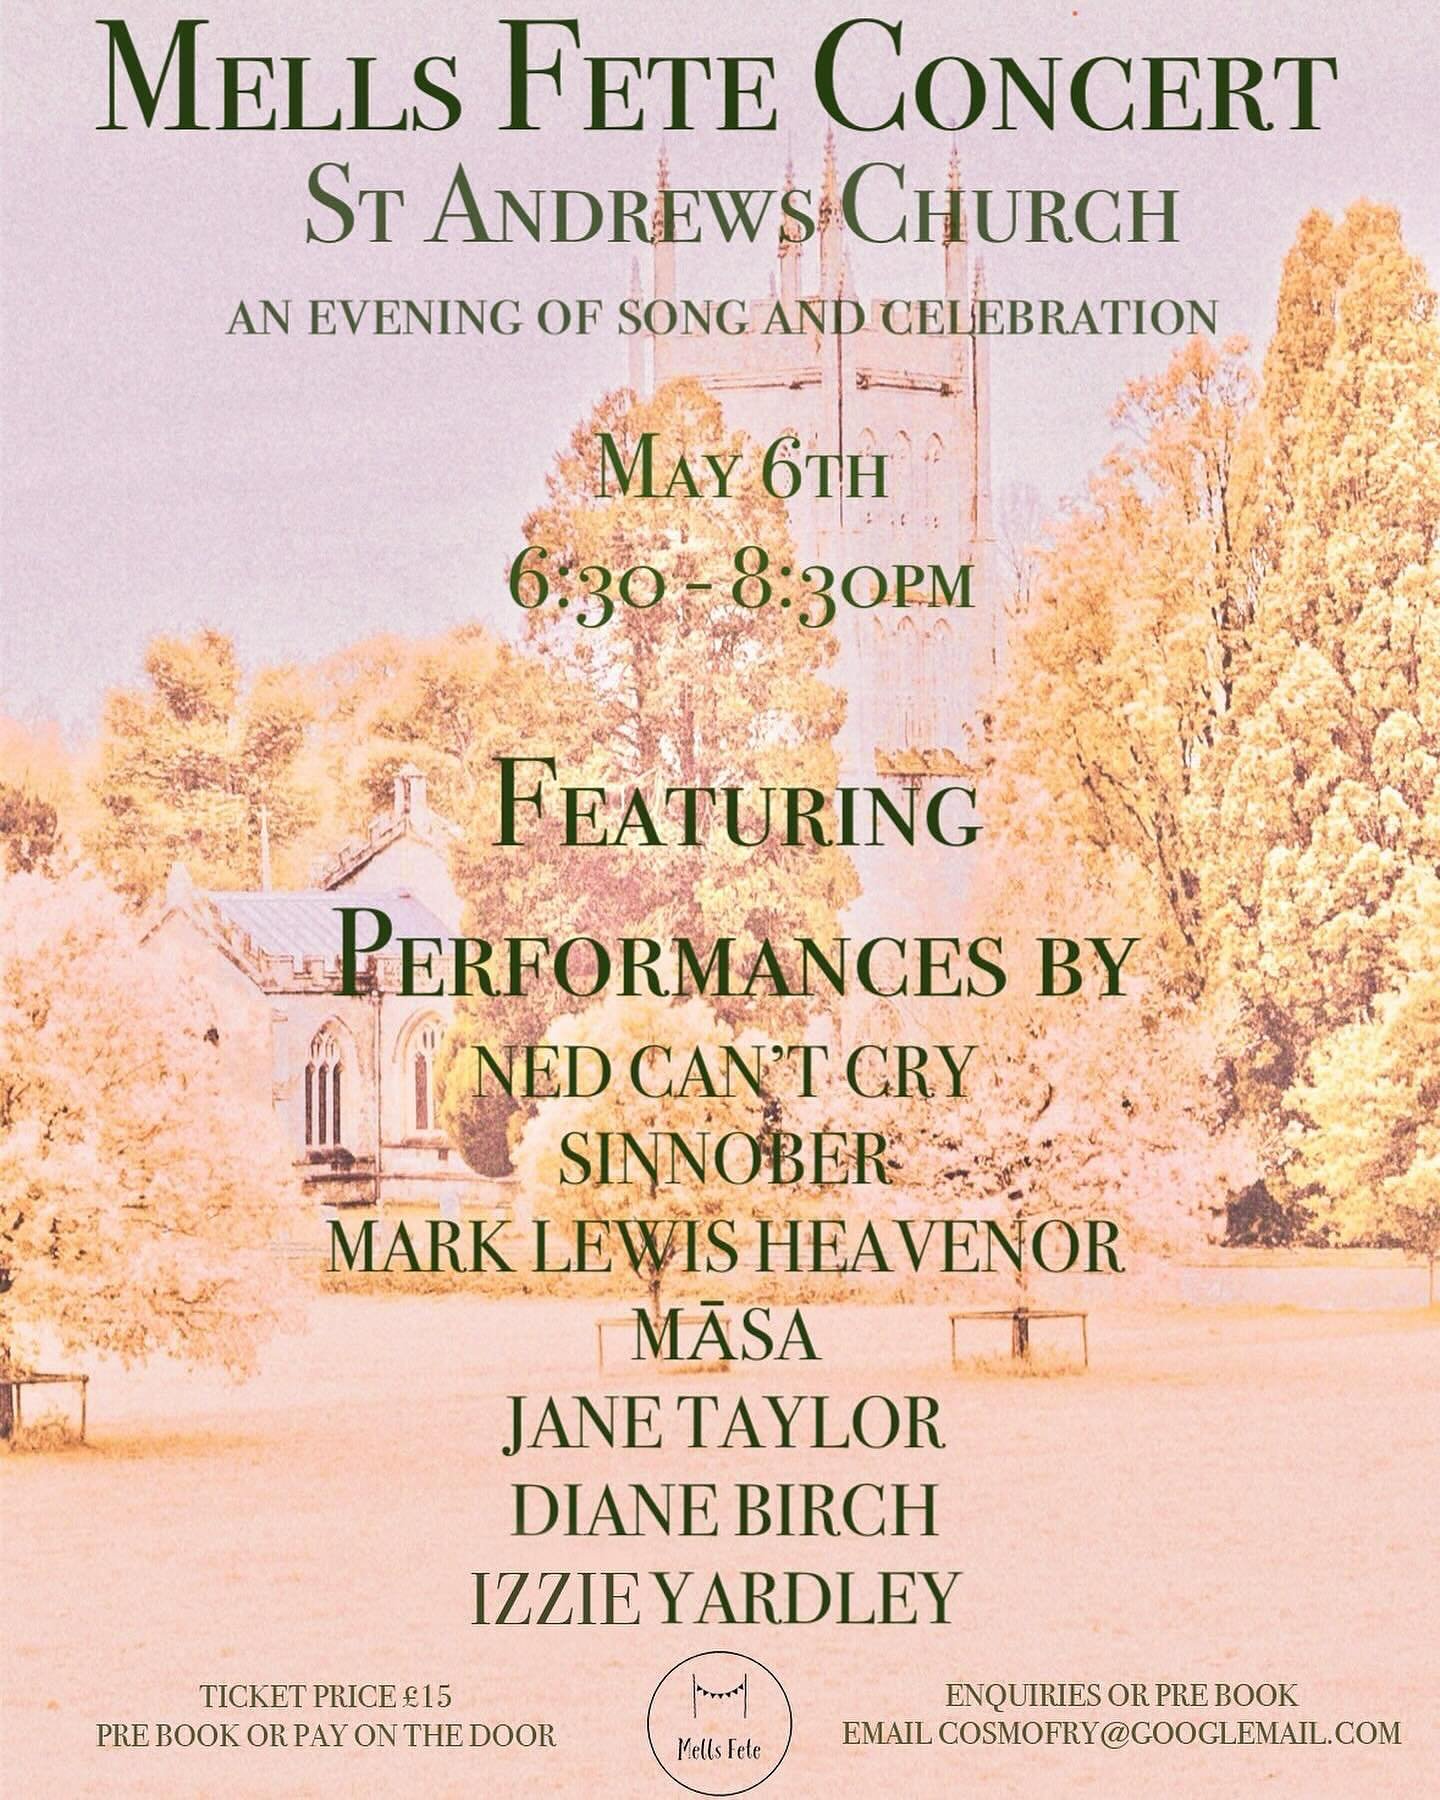 Calling all Somerset folks 📯Our Mells Fete extravaganza will extend into the eve this coming Monday, May 6th and I have rounded up an incredible lineup of local talent to perform in the St.Andrews Church along with me !!! Get your tickets at the doo